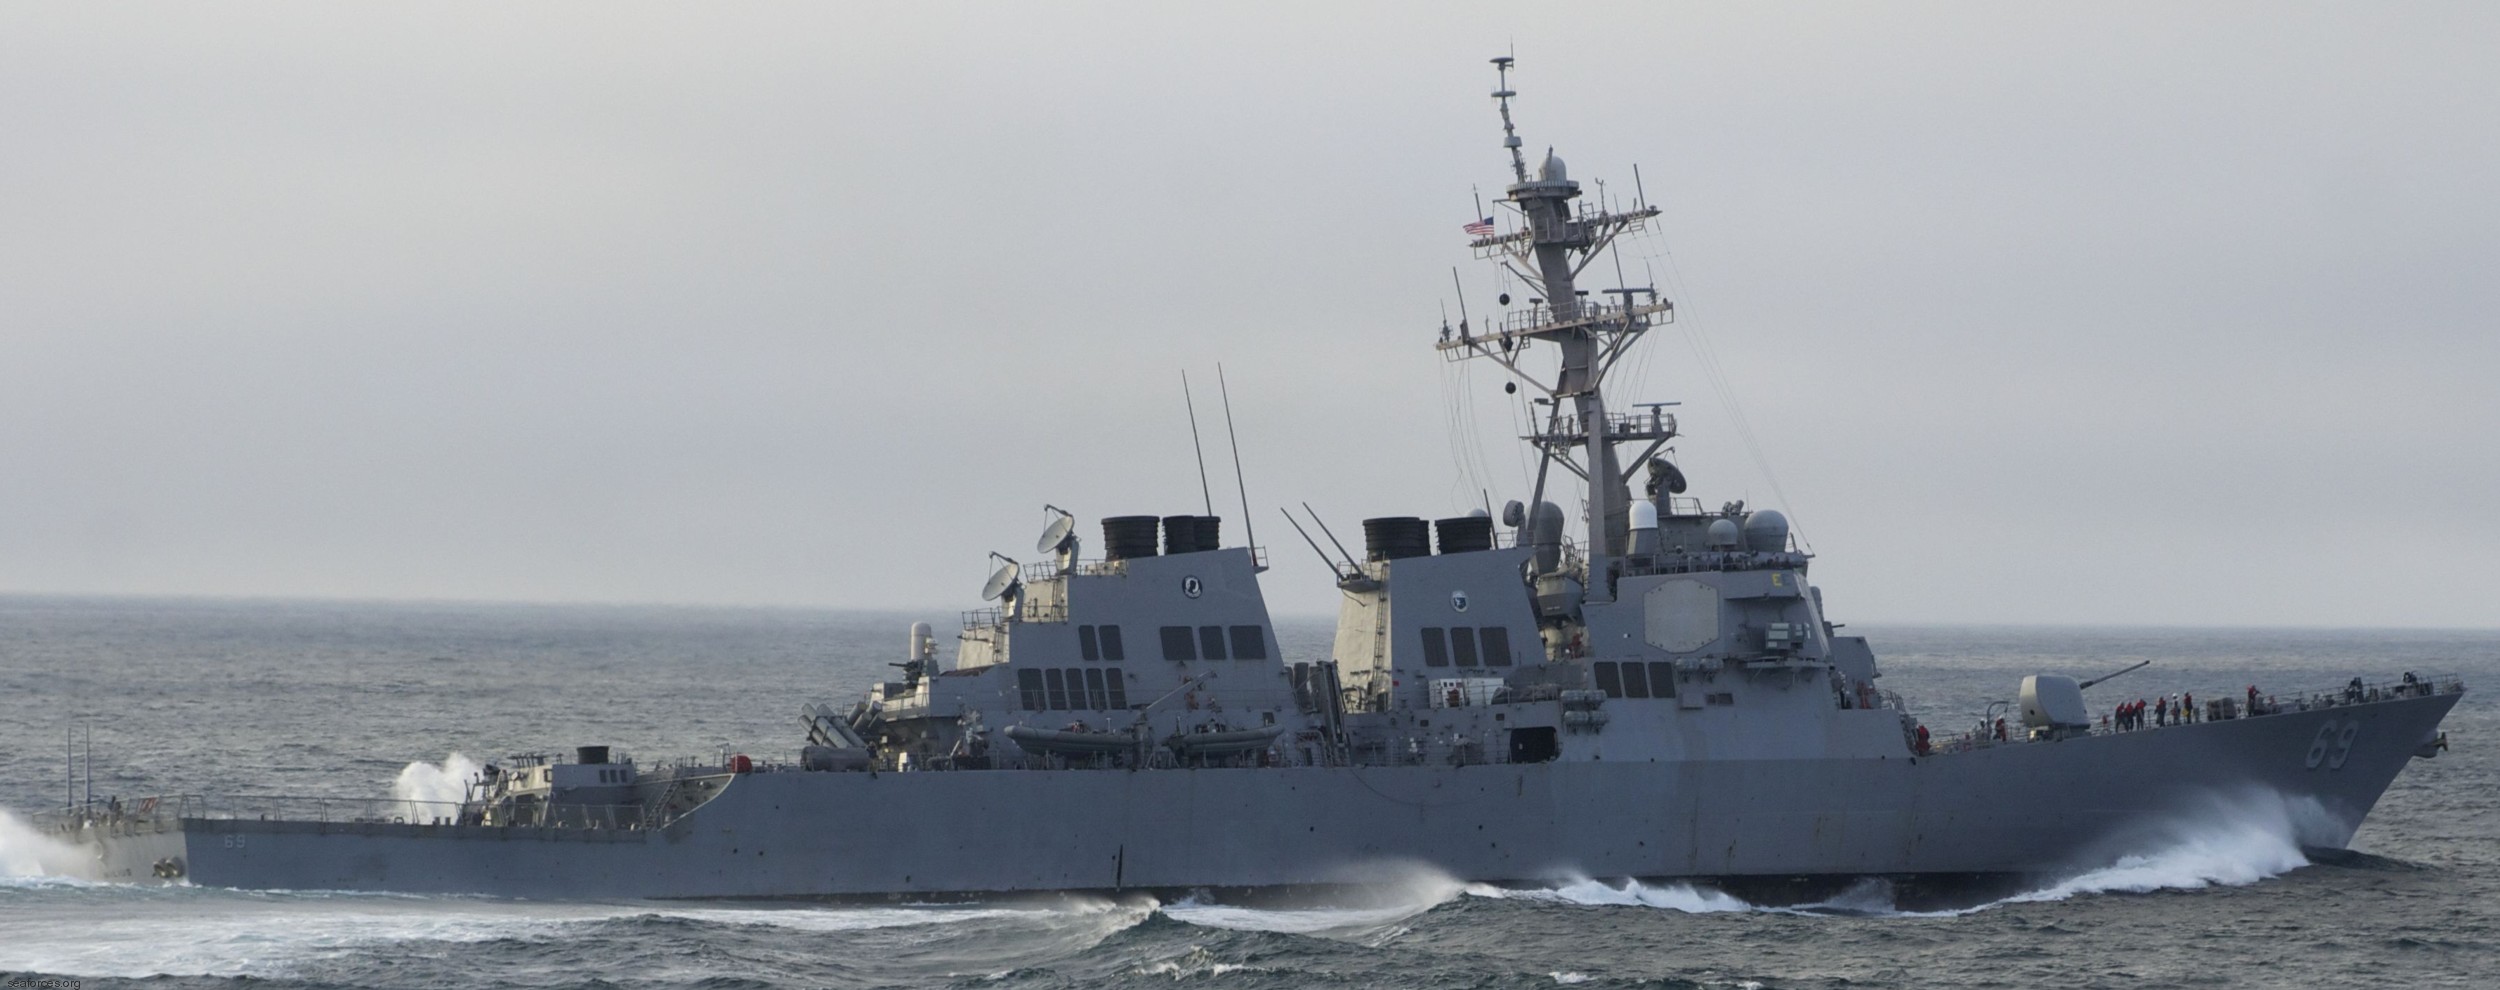 ddg-69 uss milius guided missile destroyer arleigh burke class aegis bmd 25